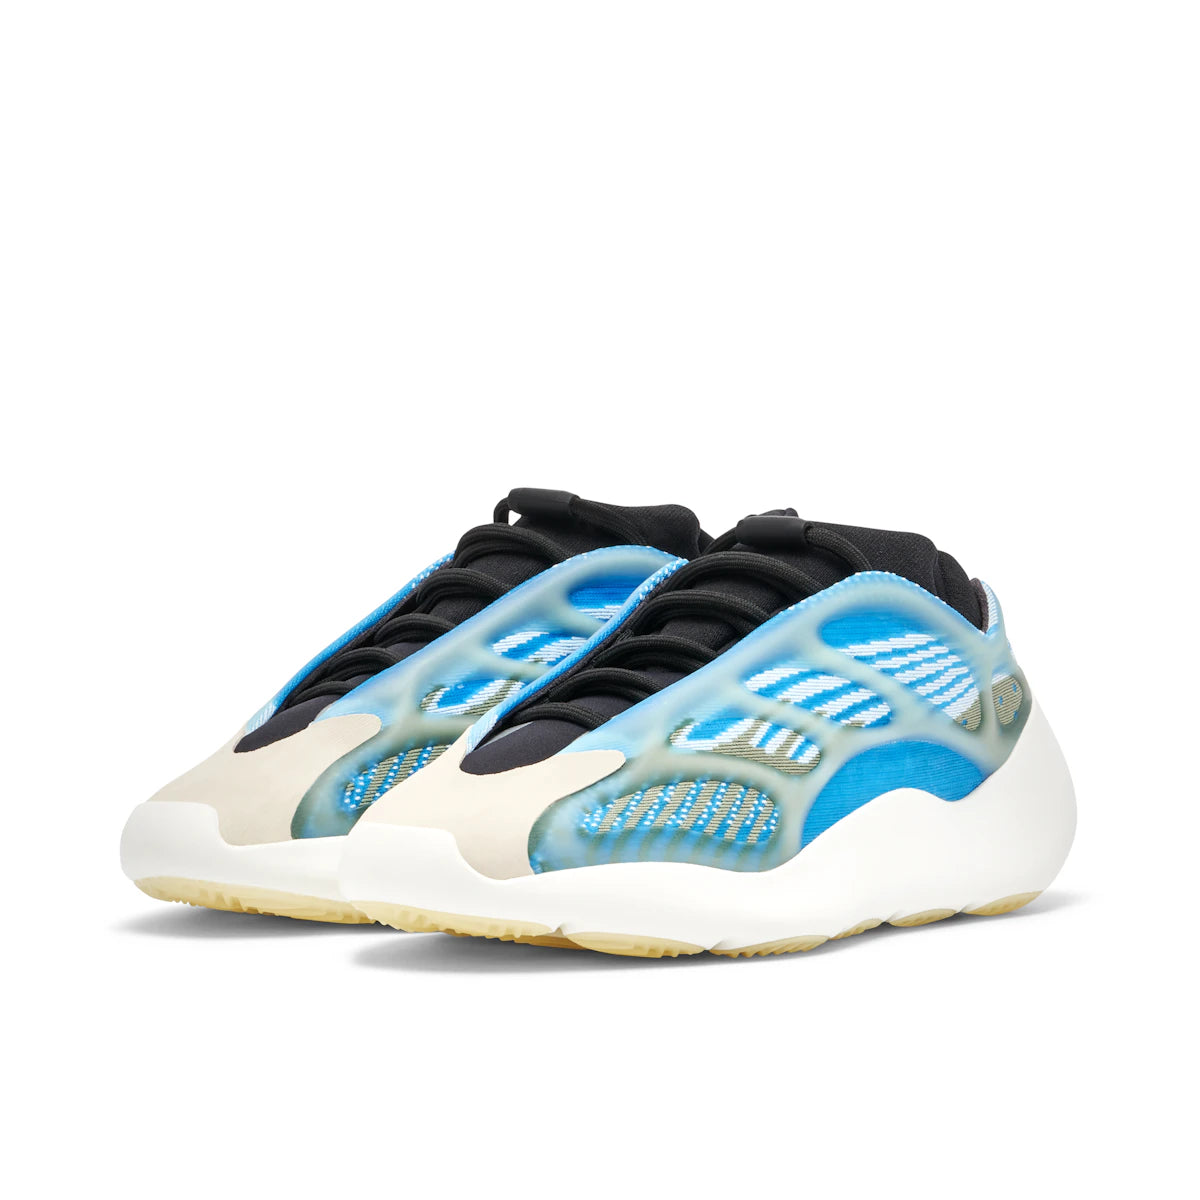 Adidas Yeezy 700 V3 Arzareth by Yeezy from £255.00